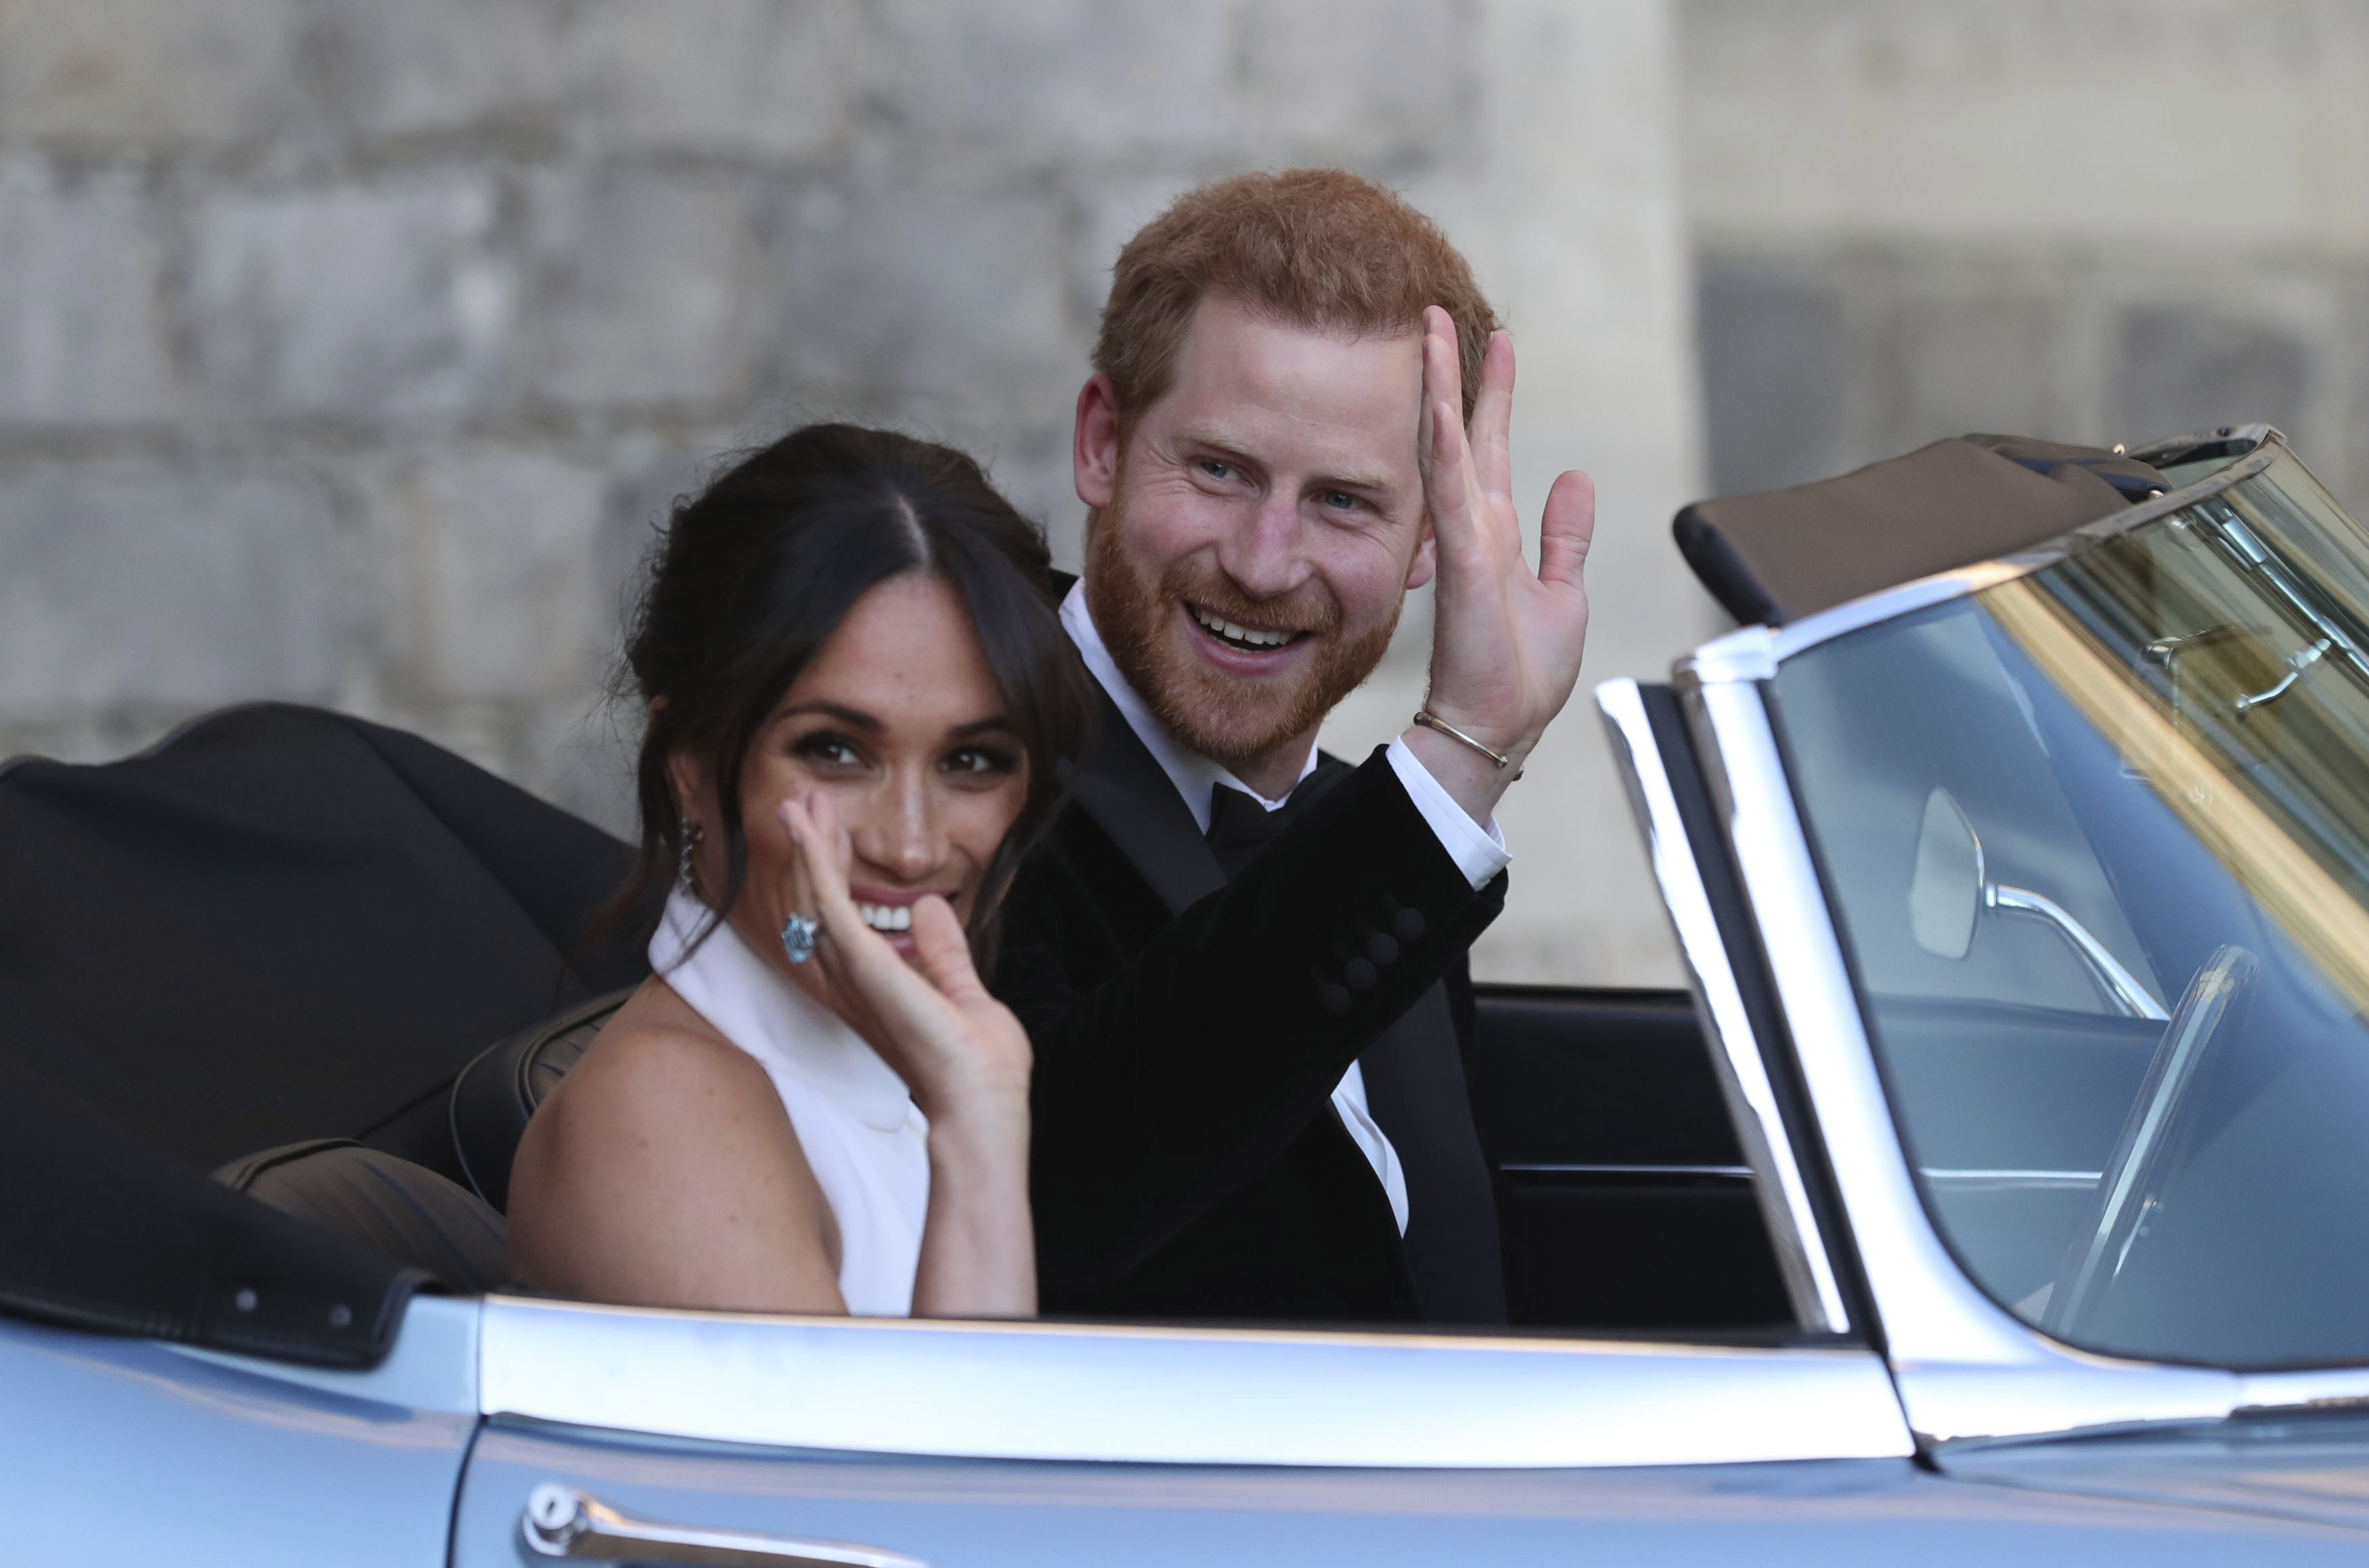 The newly married Duke and Duchess of Sussex, Meghan Markle and Prince Harry, leave Windsor Castle in a convertible car after their wedding in Windsor, England, to attend an evening reception at Frogmore House, hosted by the Prince of Wales, Saturday, May 19, 2018. (Steve Parsons/pool photo via AP)